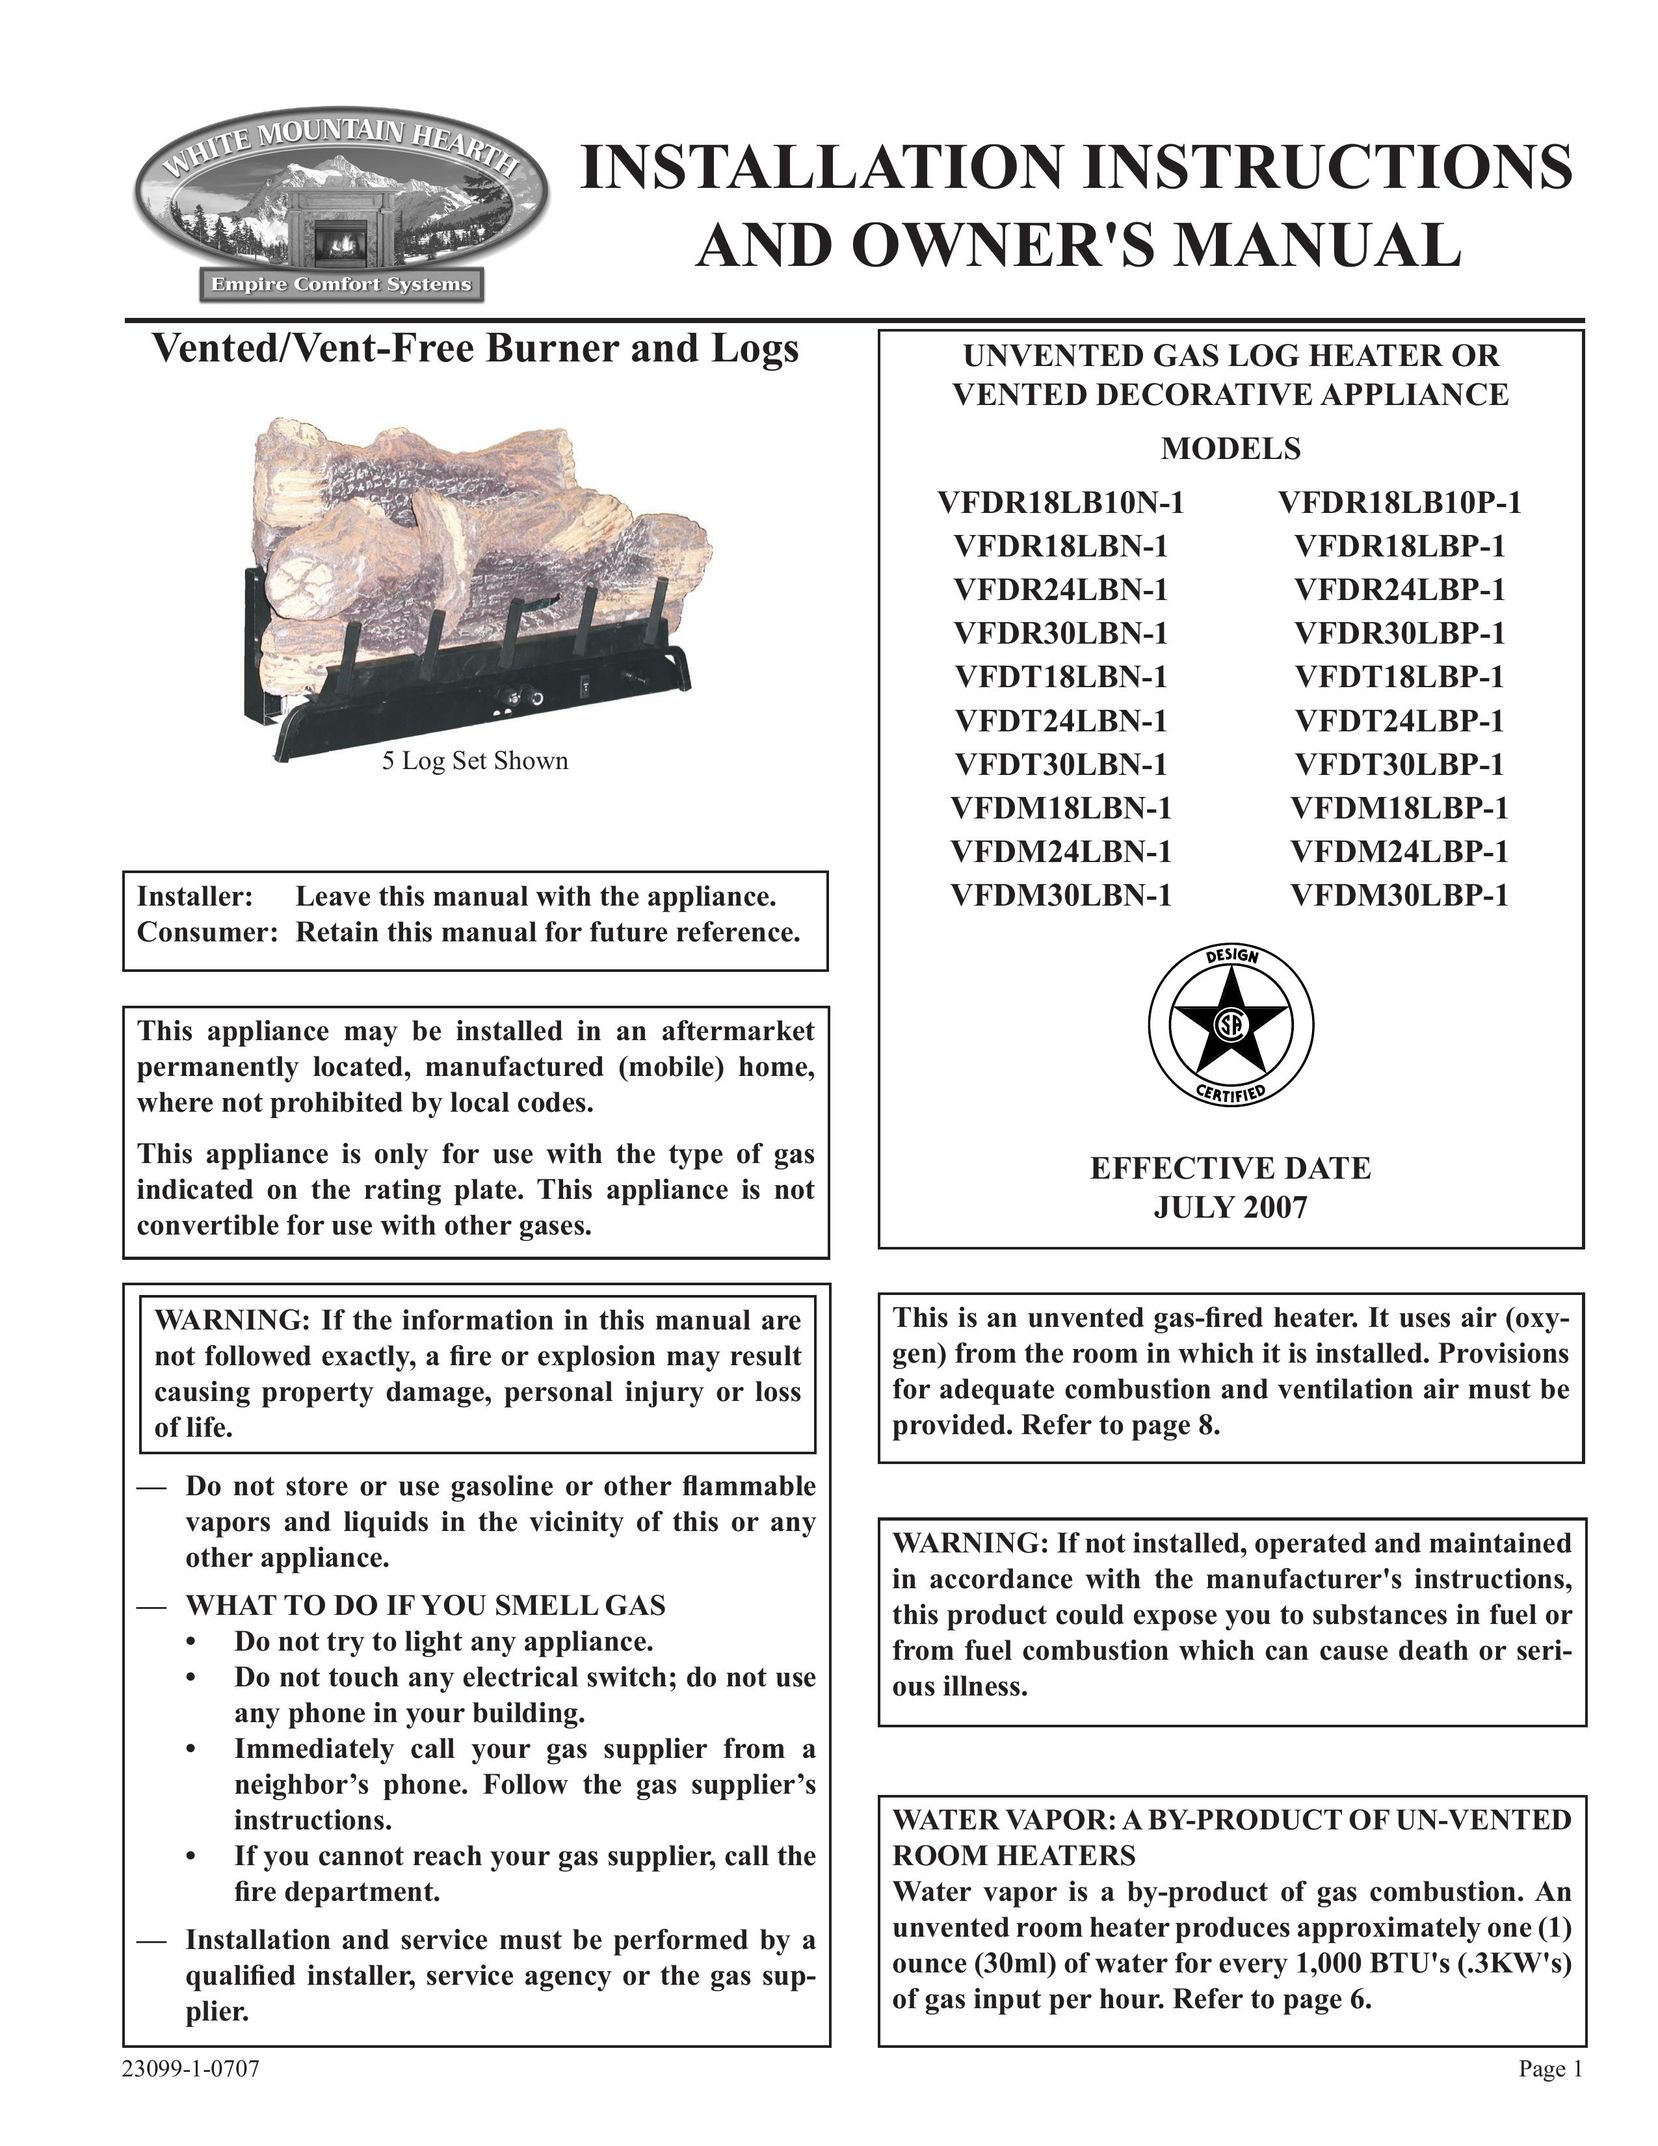 Empire Comfort Systems VFDT30LBN-1 Gas Heater User Manual